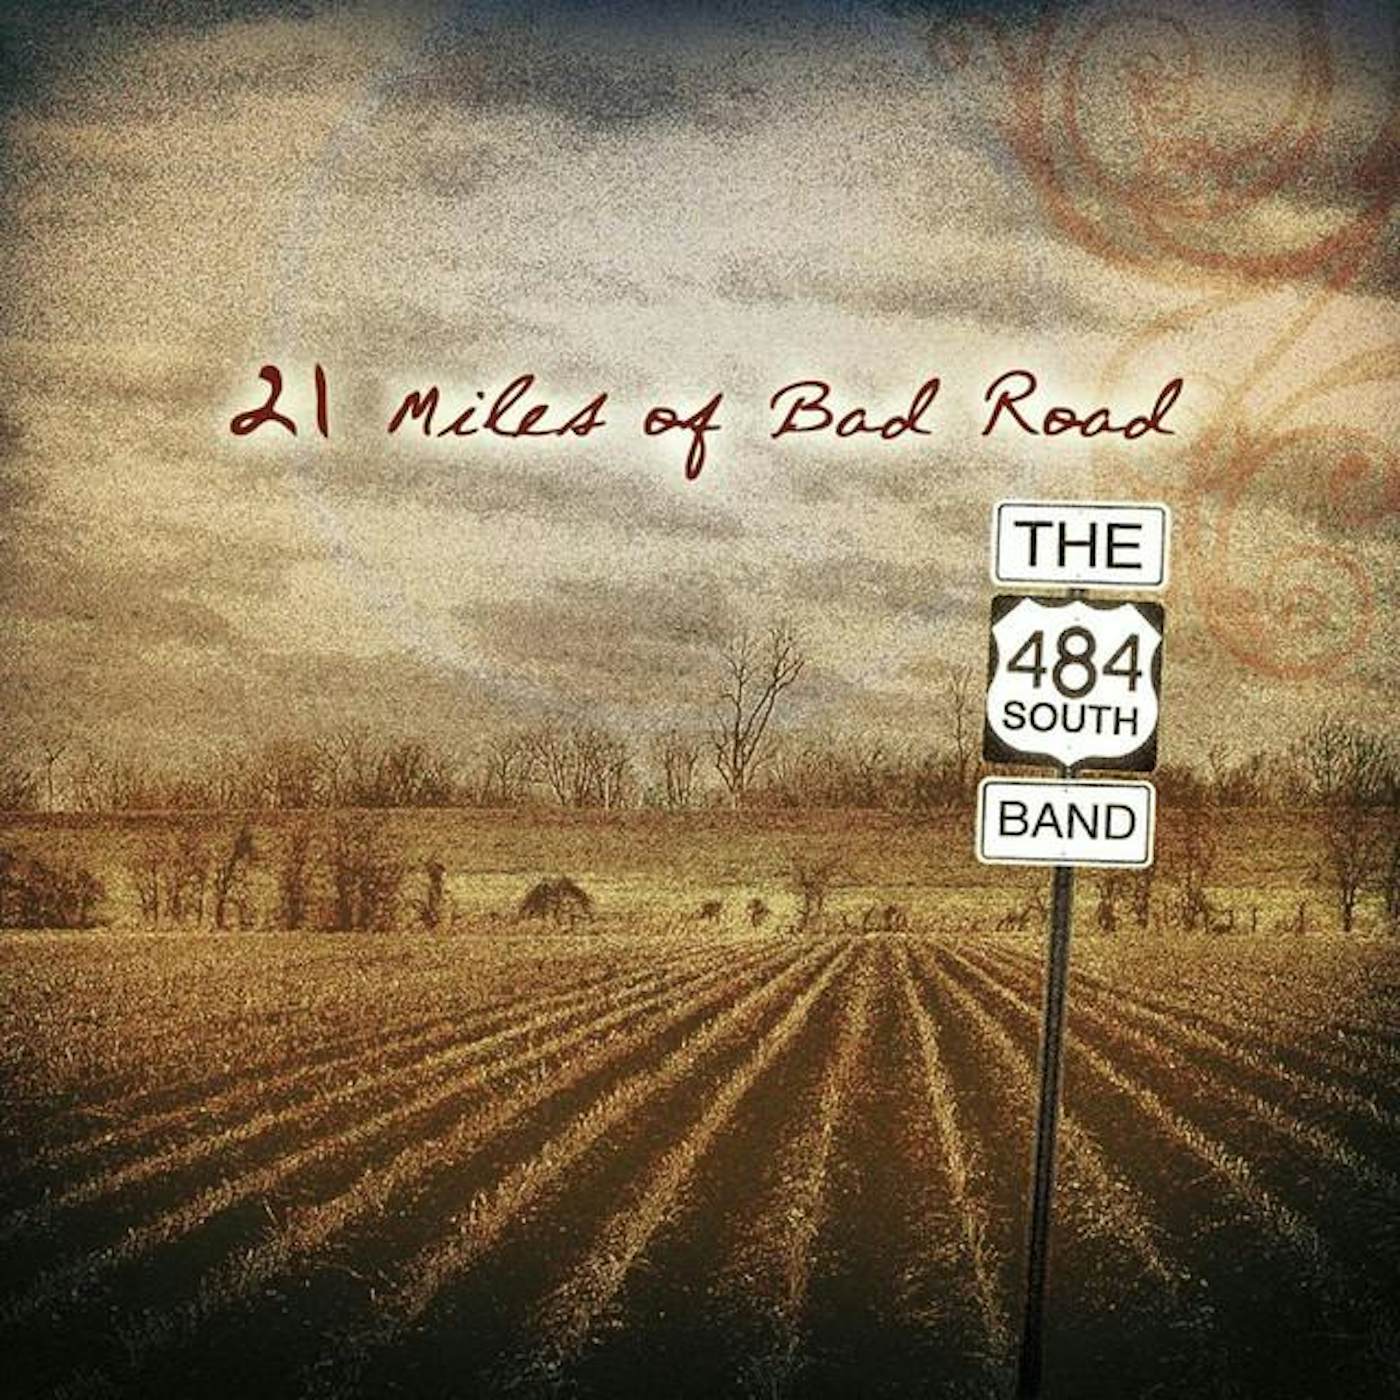 The 484 South Band